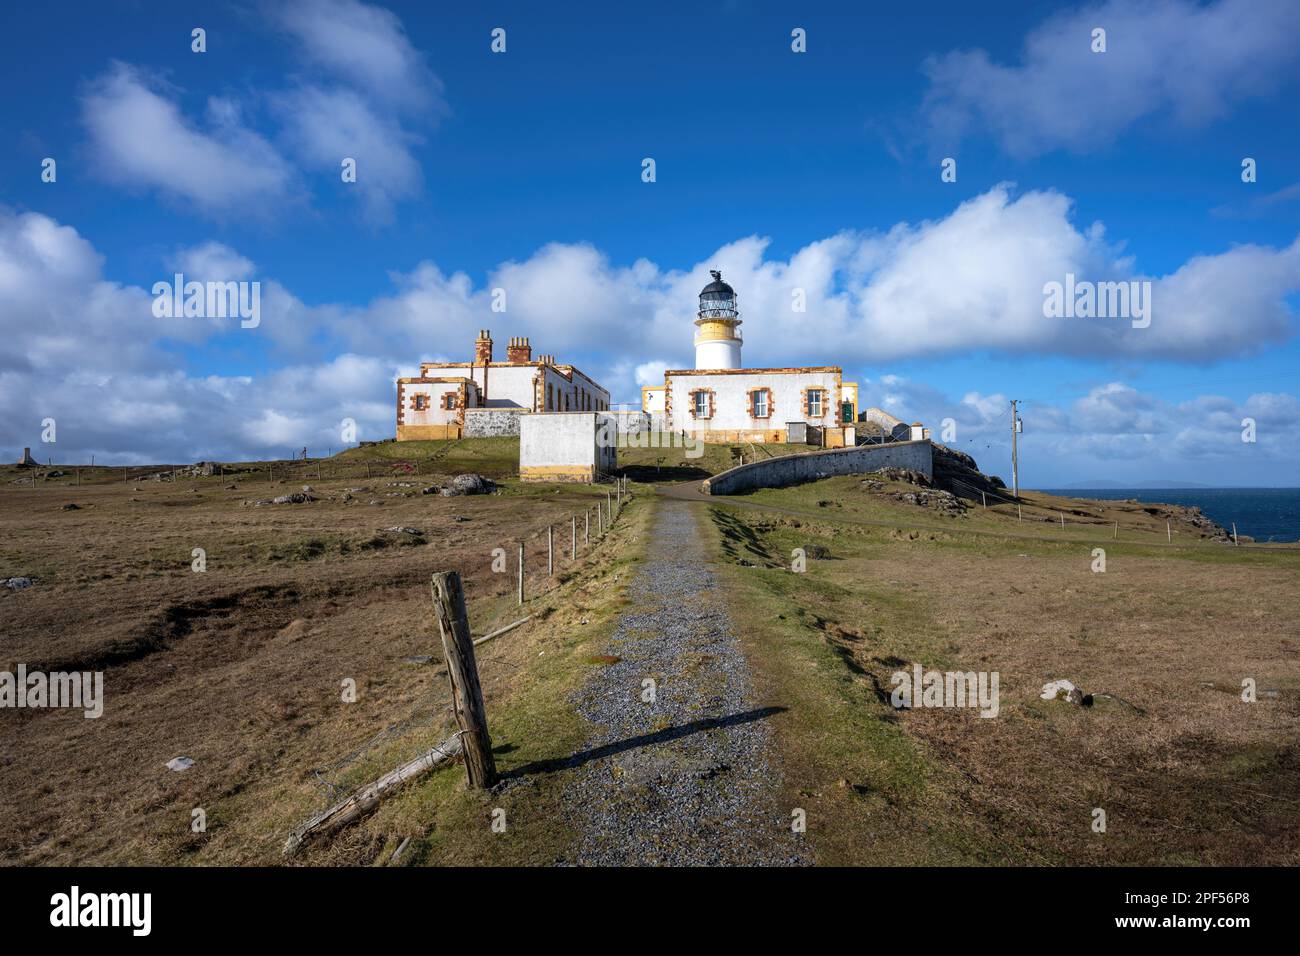 Neist Point is a viewpoint on the most westerly point of Skye. Neist Point Lighthouse has been located there since 1909. Stock Photo